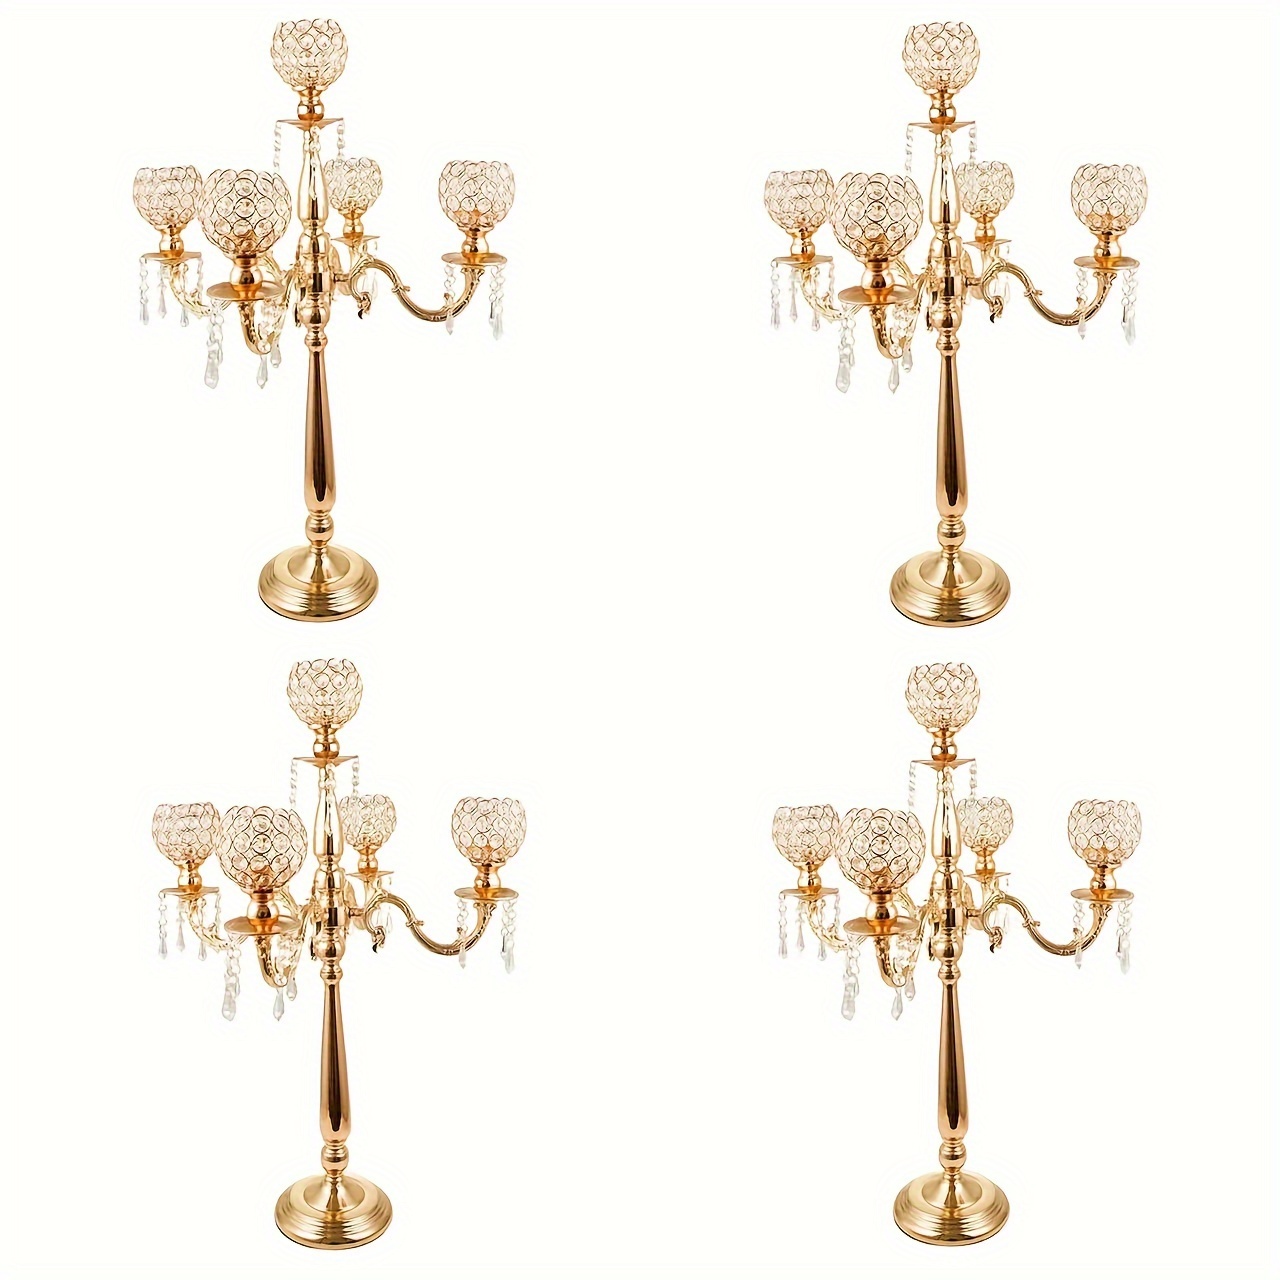 

4 Pcs 5 Arm 29.5in Crystal Candelabra Centerpieces For Tables Gold Candle Holders For Table Centerpiece Tall Crystal Candle Holders For Wedding Party Christmas Events